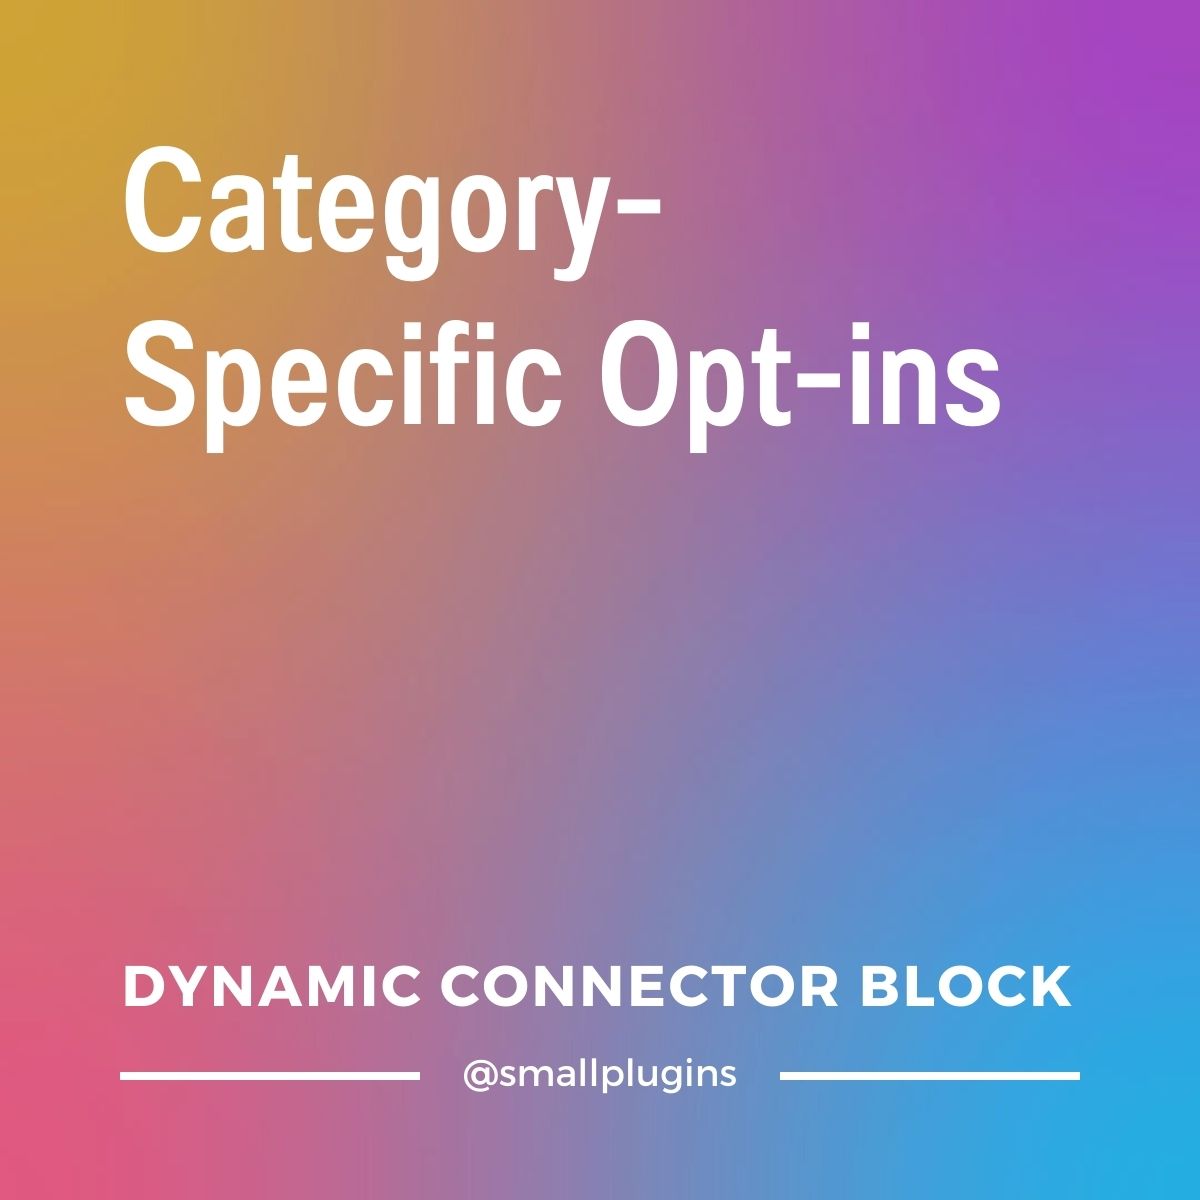 How to create category-specific opt-ins using Dynamic Connector Block